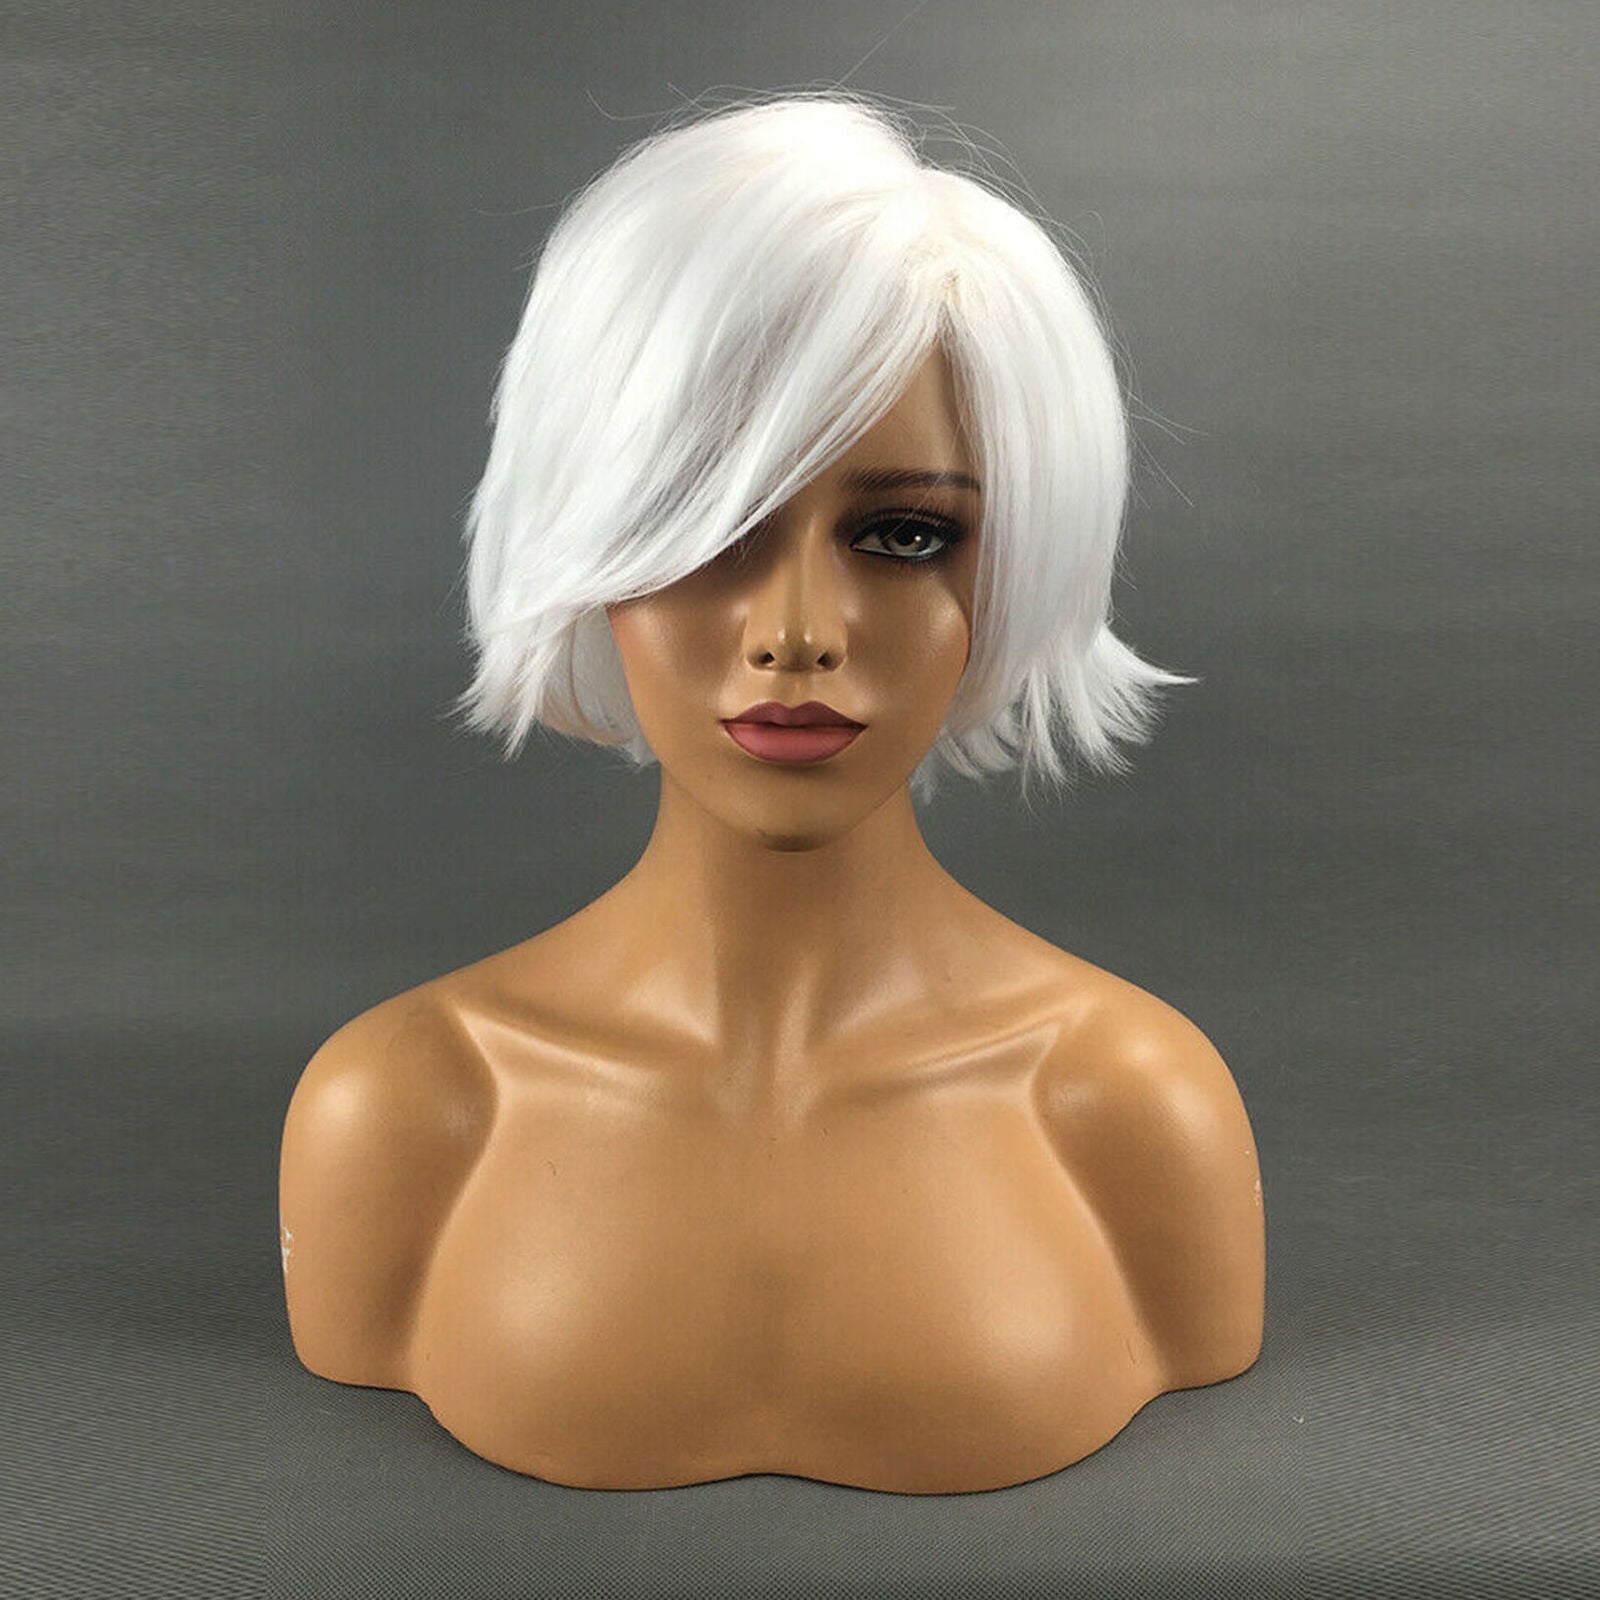 Fashion Women's Short Straight Wigs White Synthetic Natural Full Hair Bob Wig